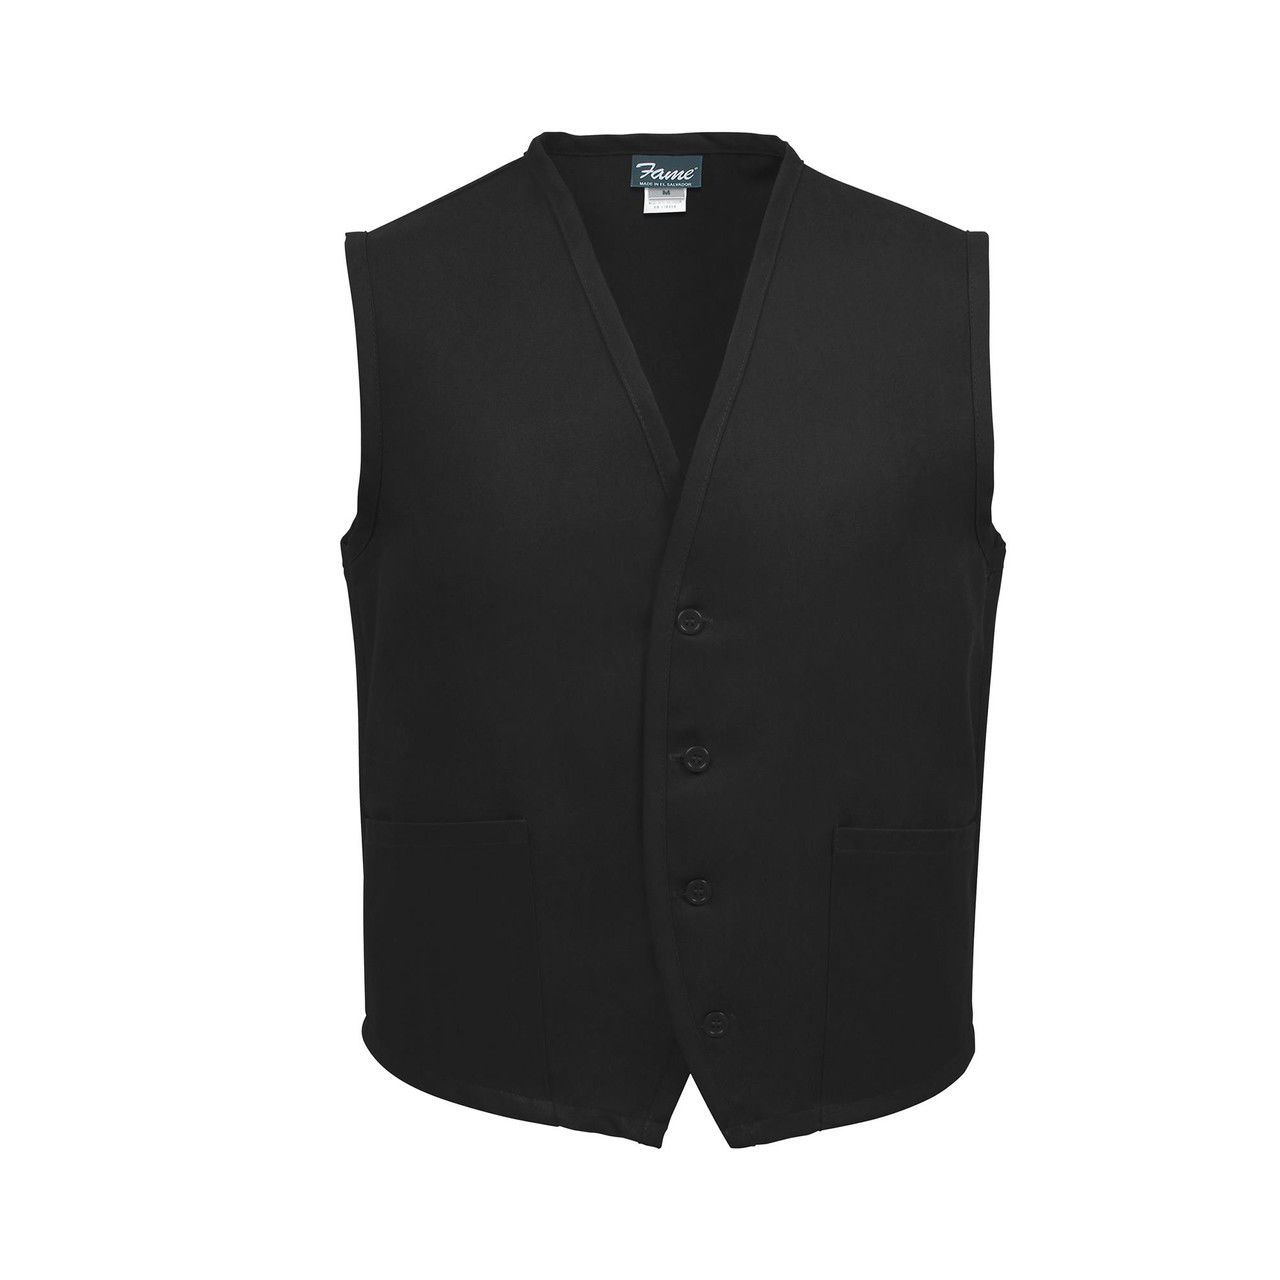 Is the black Professional Unisex Uniform Vest made of quality material?